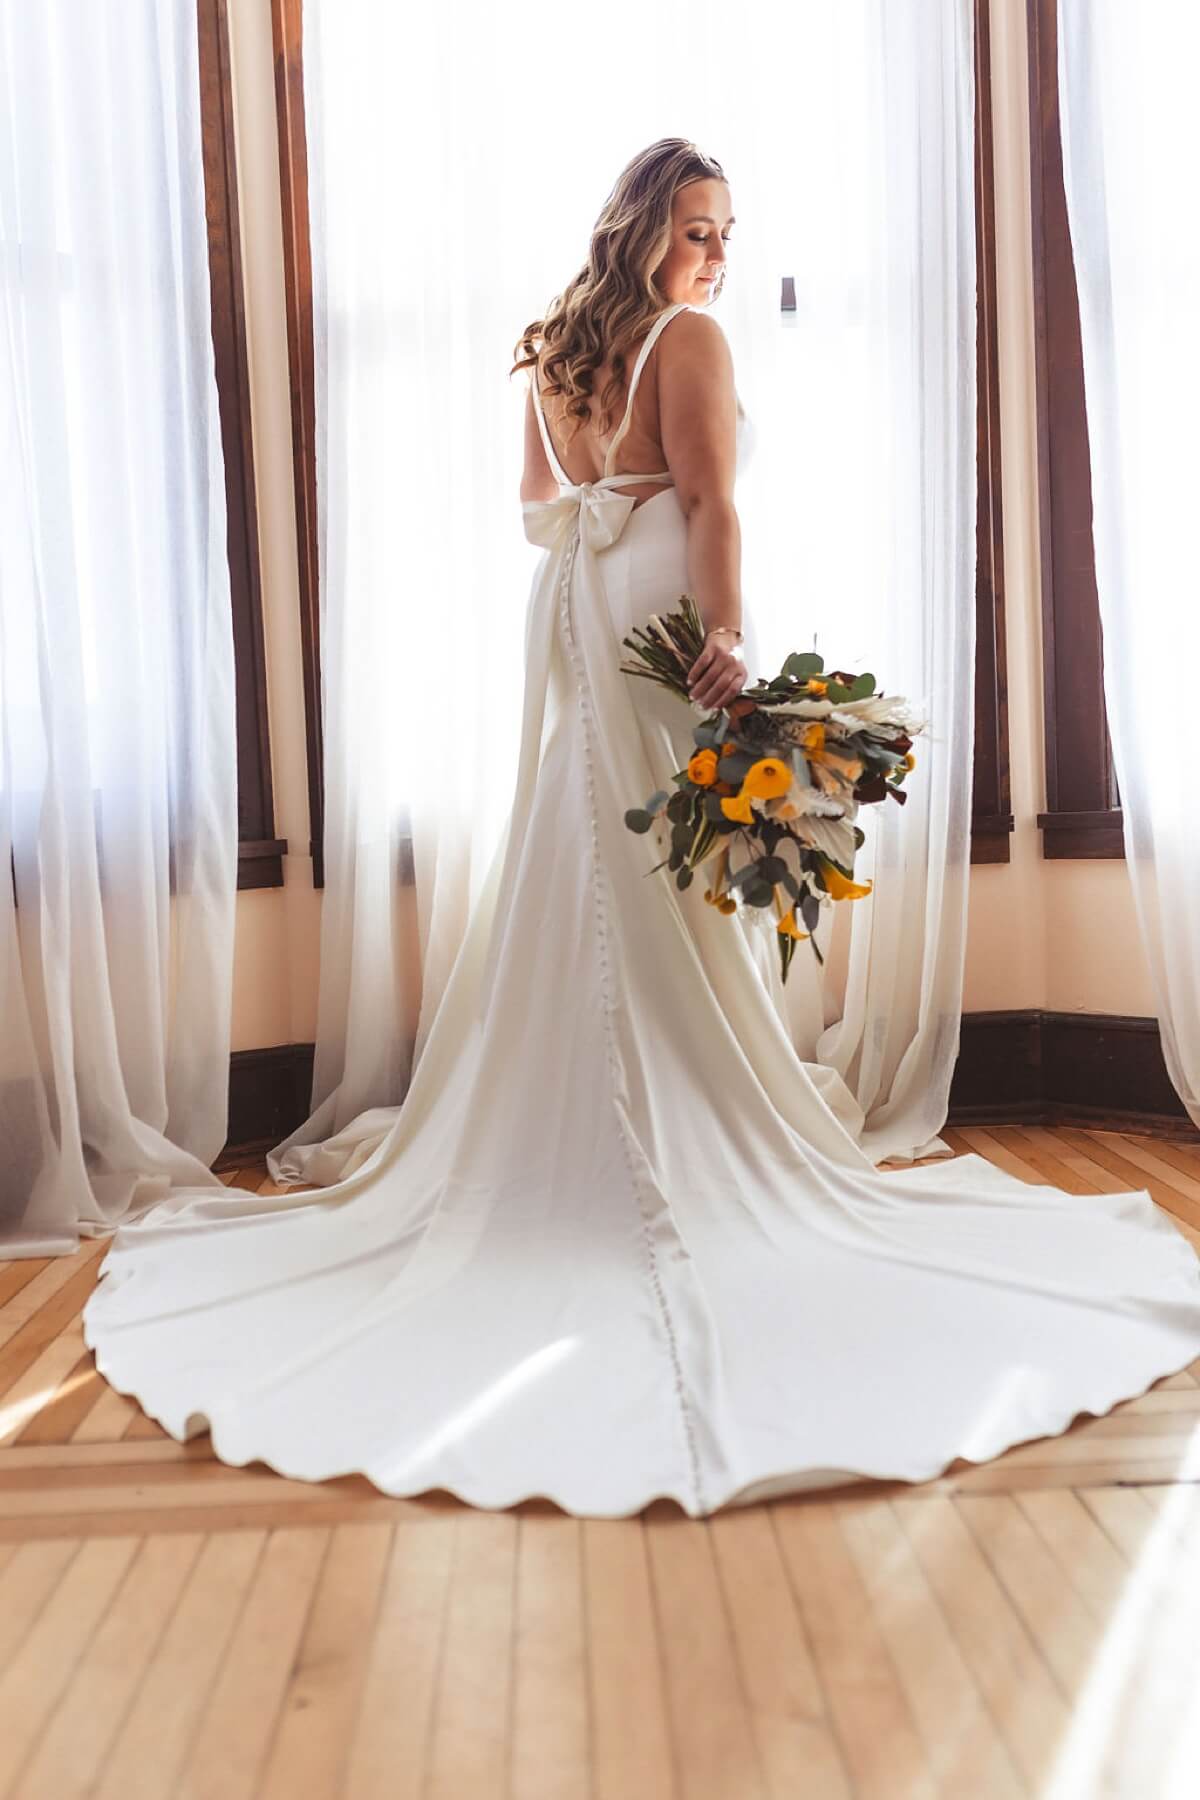 Bride wearing dress with long train holding bouquet of yellow flowers and standing in window